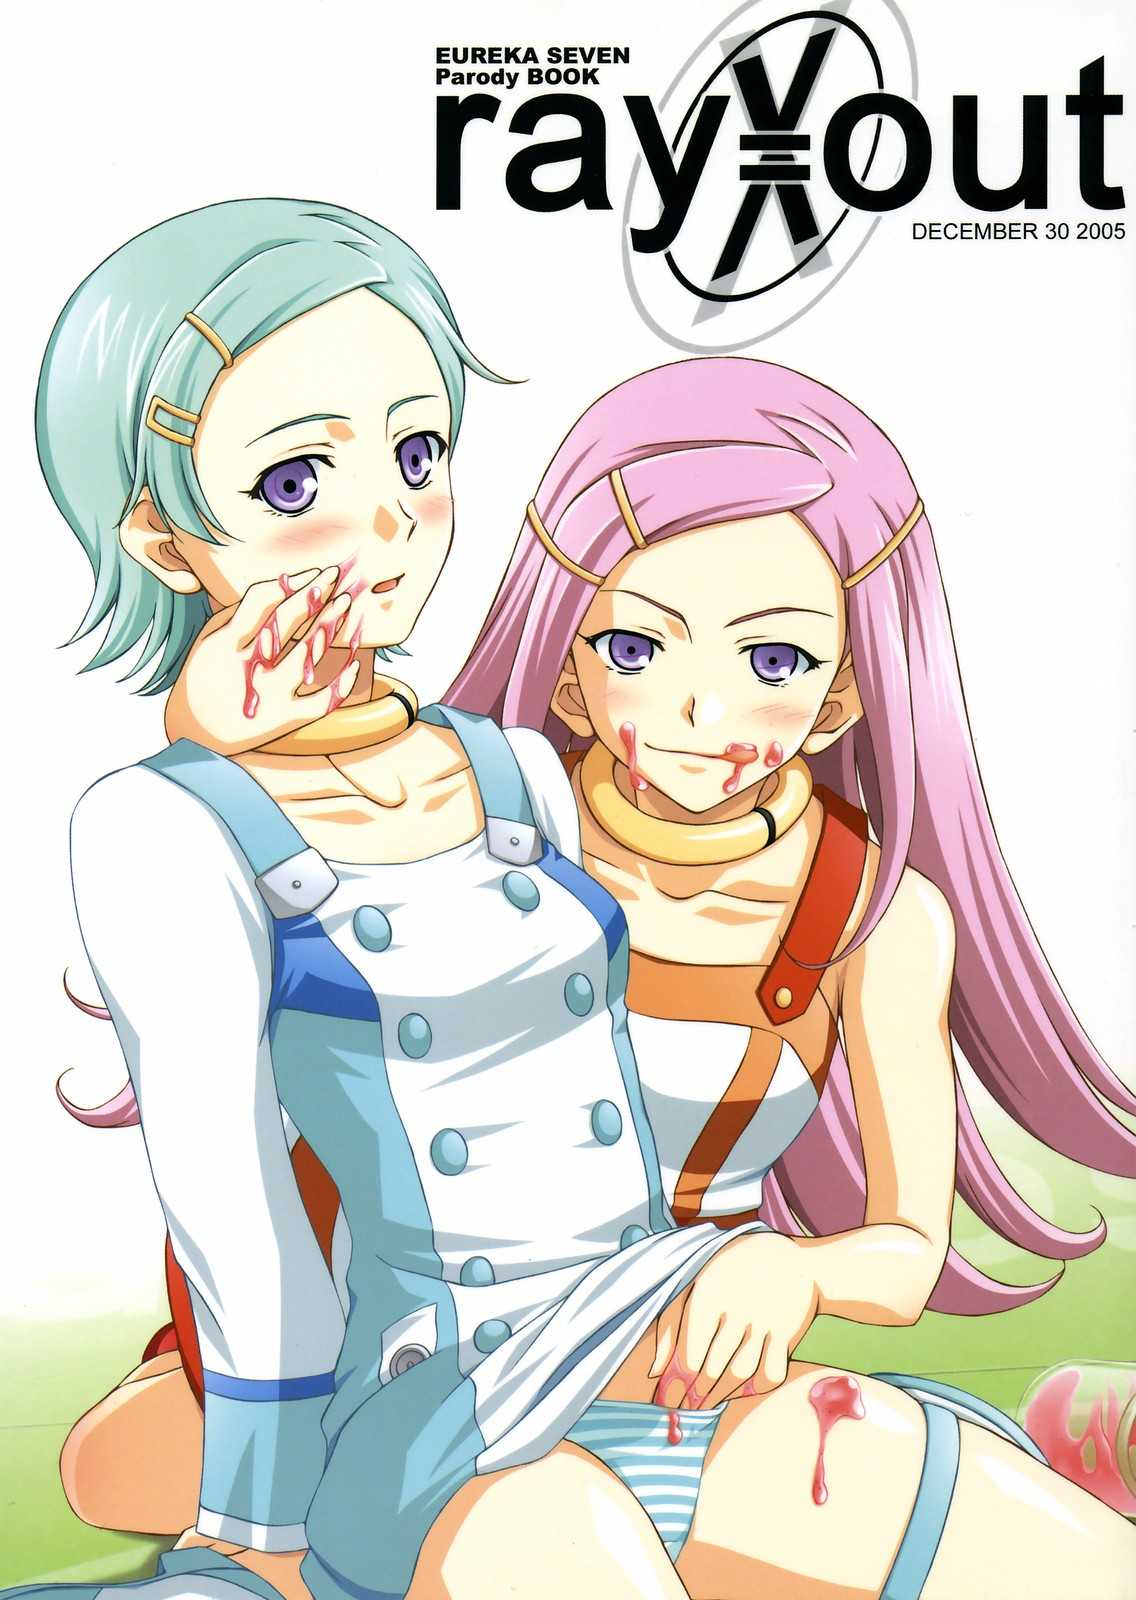 [Manitic] X ray=out (Eureka Seven) 